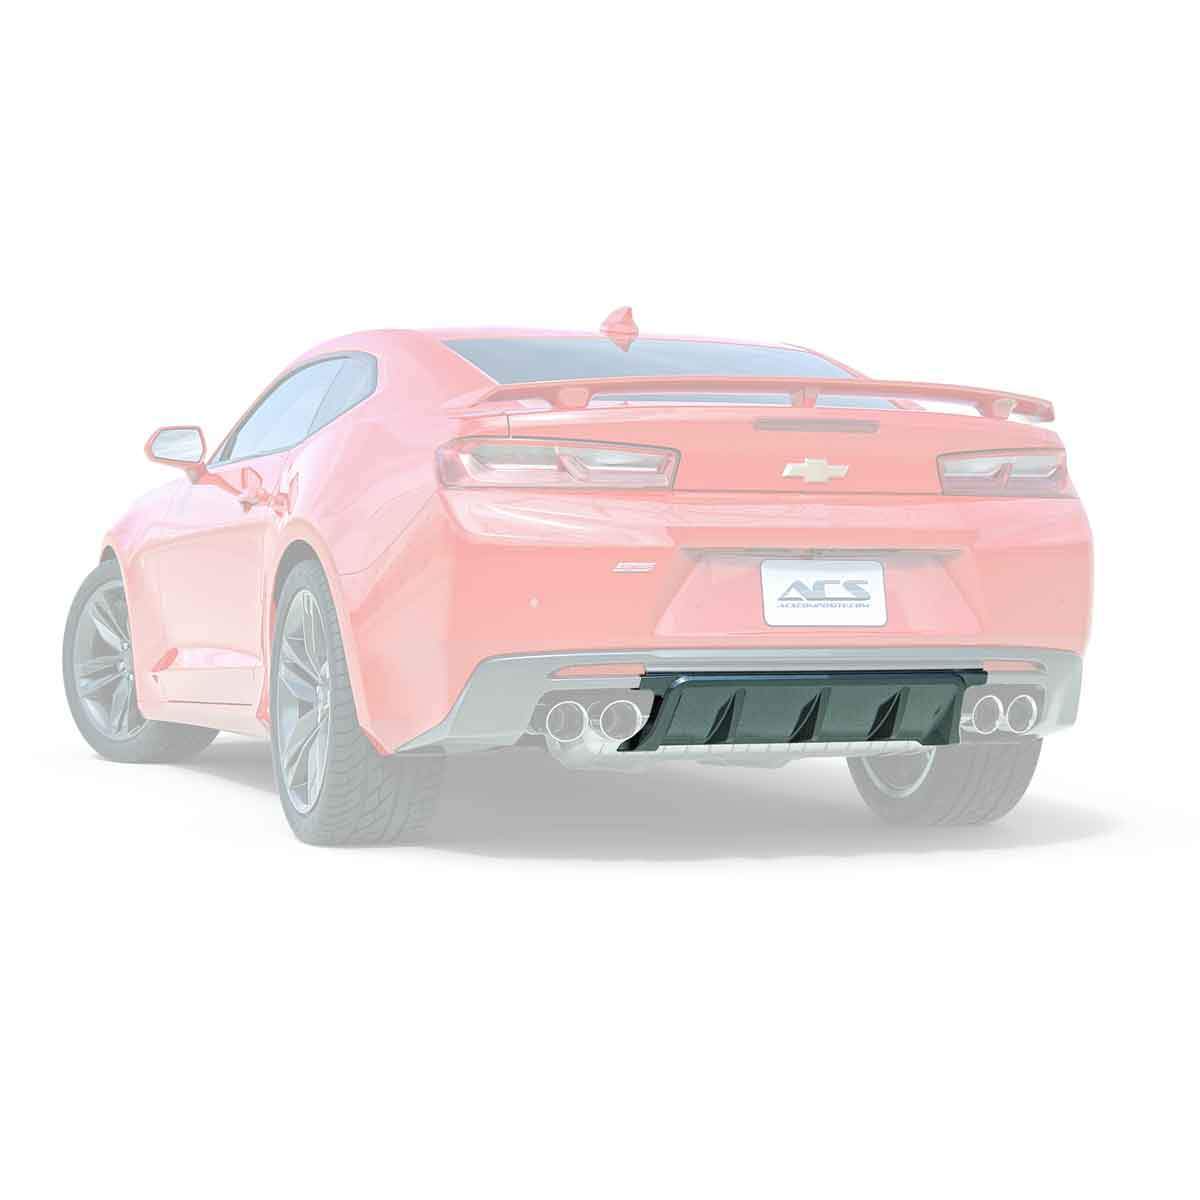 ACS Composite Gen6 Camaro Rear Diffuser in Gloss Black [48-4-045]GBA - Improves aerodynamics and complements quad exhaust systems. Easy to install with trimming template and instructions included.